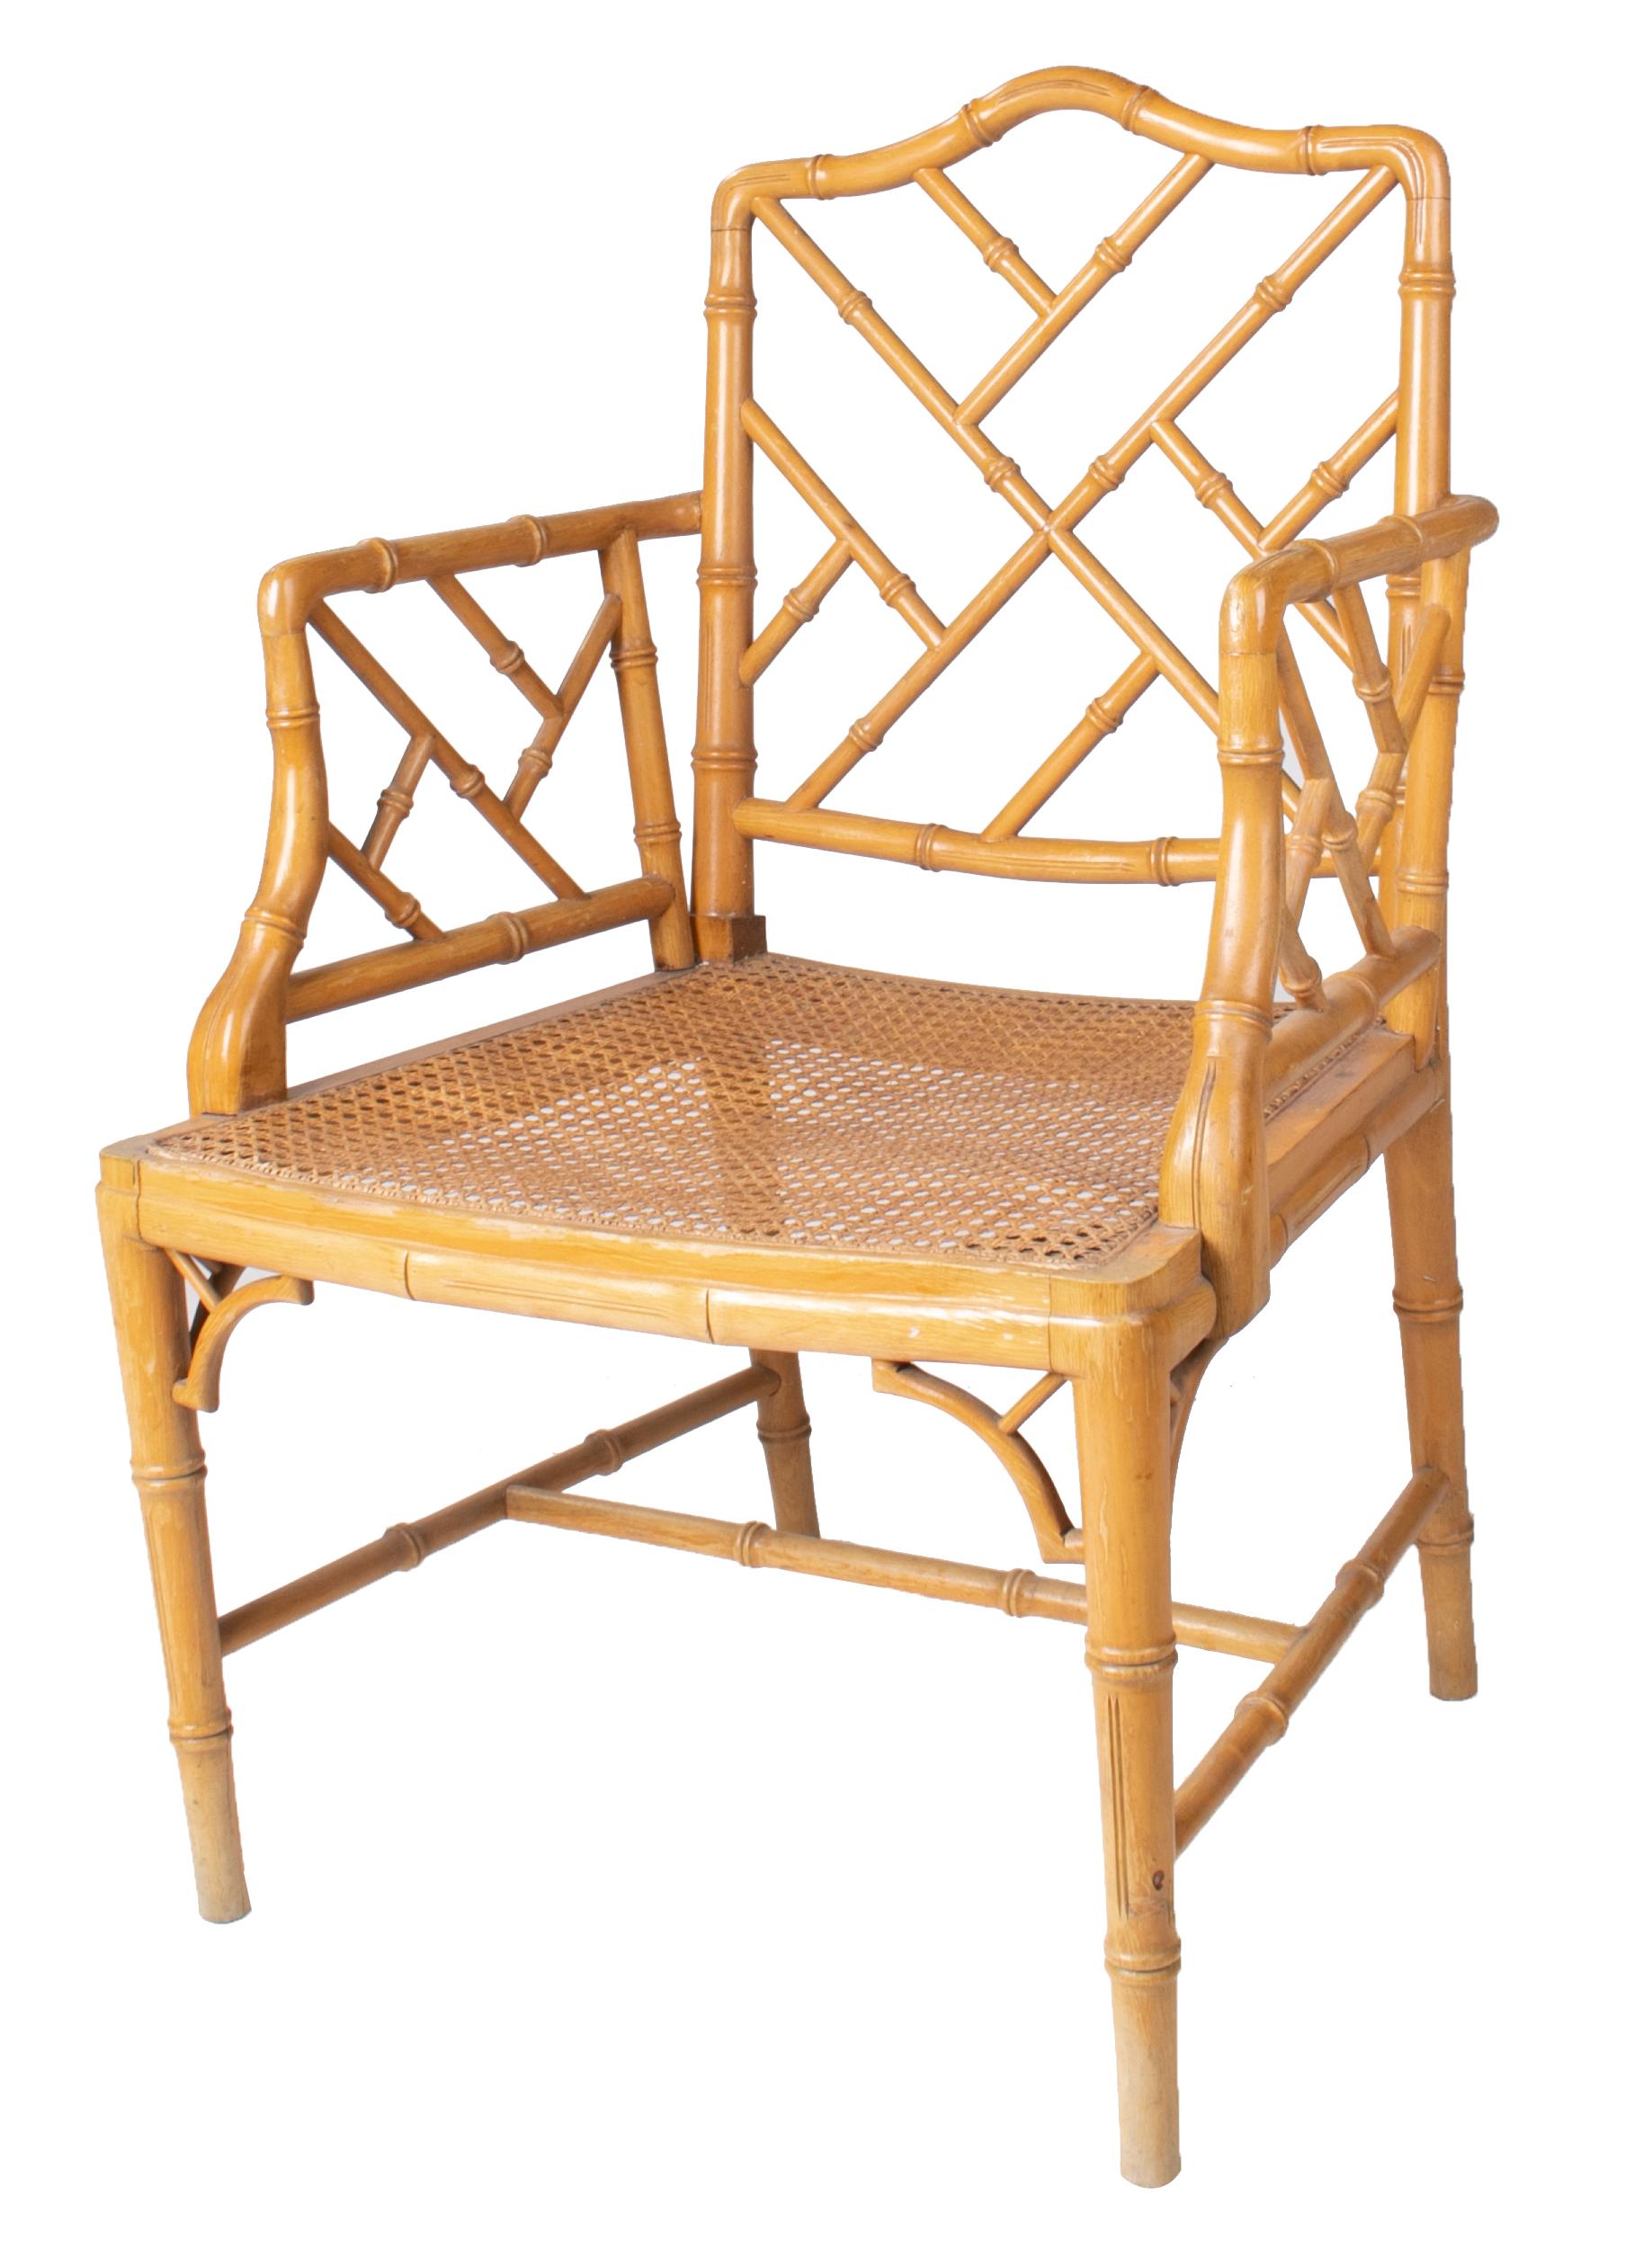 1970s Spanish wooden armchair imitating bamboo with woven wicker seat.